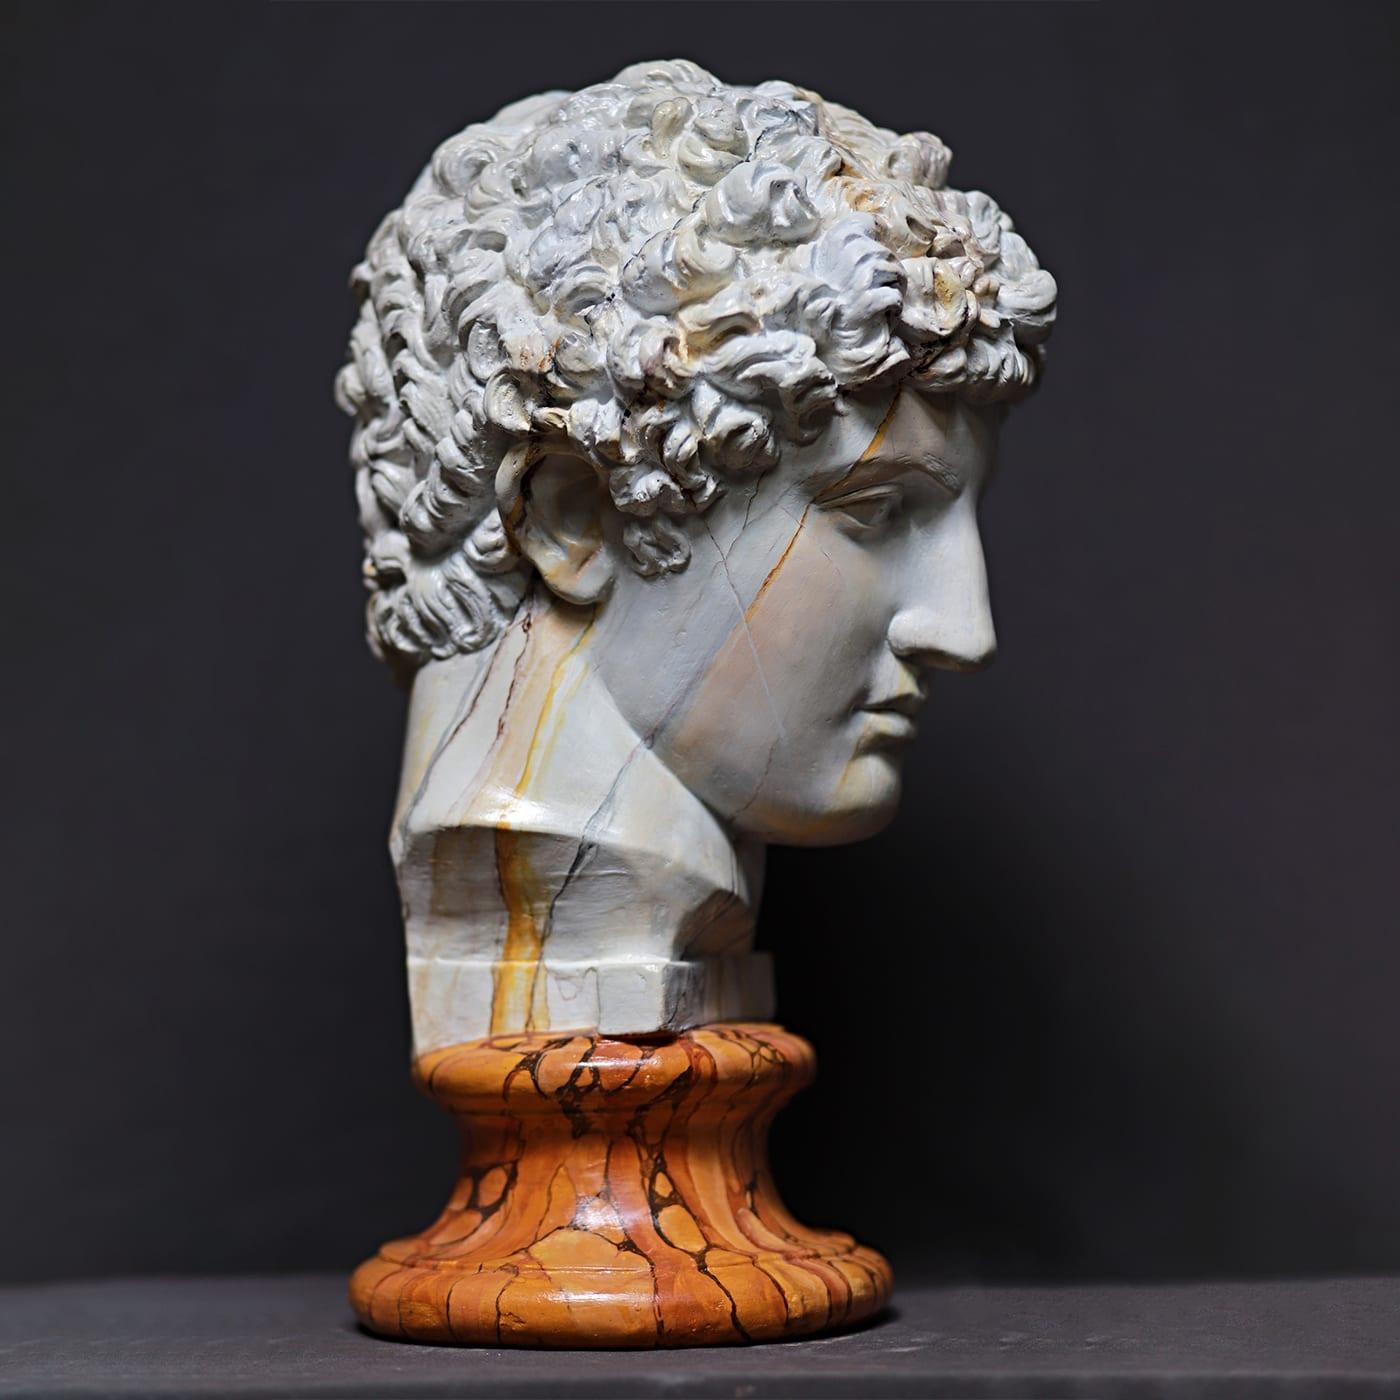 Deftly handmade of gypsum rendered with the marbling technique, which dates back to Ancient Roman times especially typical of the Pompeian paintings, this sculpture depicts Antinoo, a Bithynian Greek young boy beloved by the Roman emperor Hadrian,